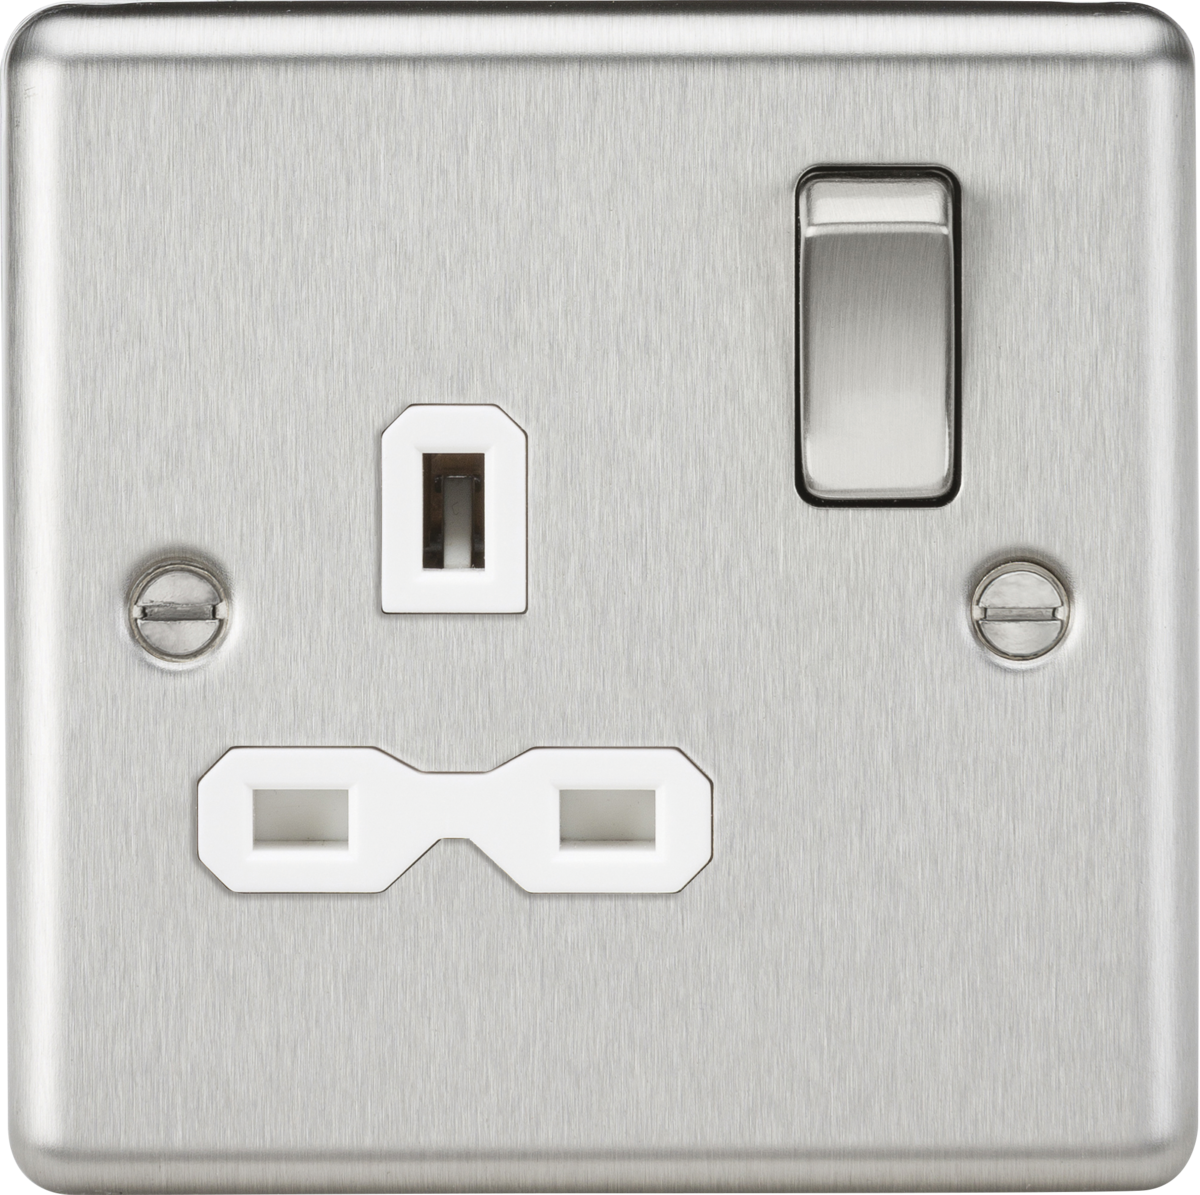 Knightsbridge 13A 1G DP Switched Socket with Insert - Rounded Edge